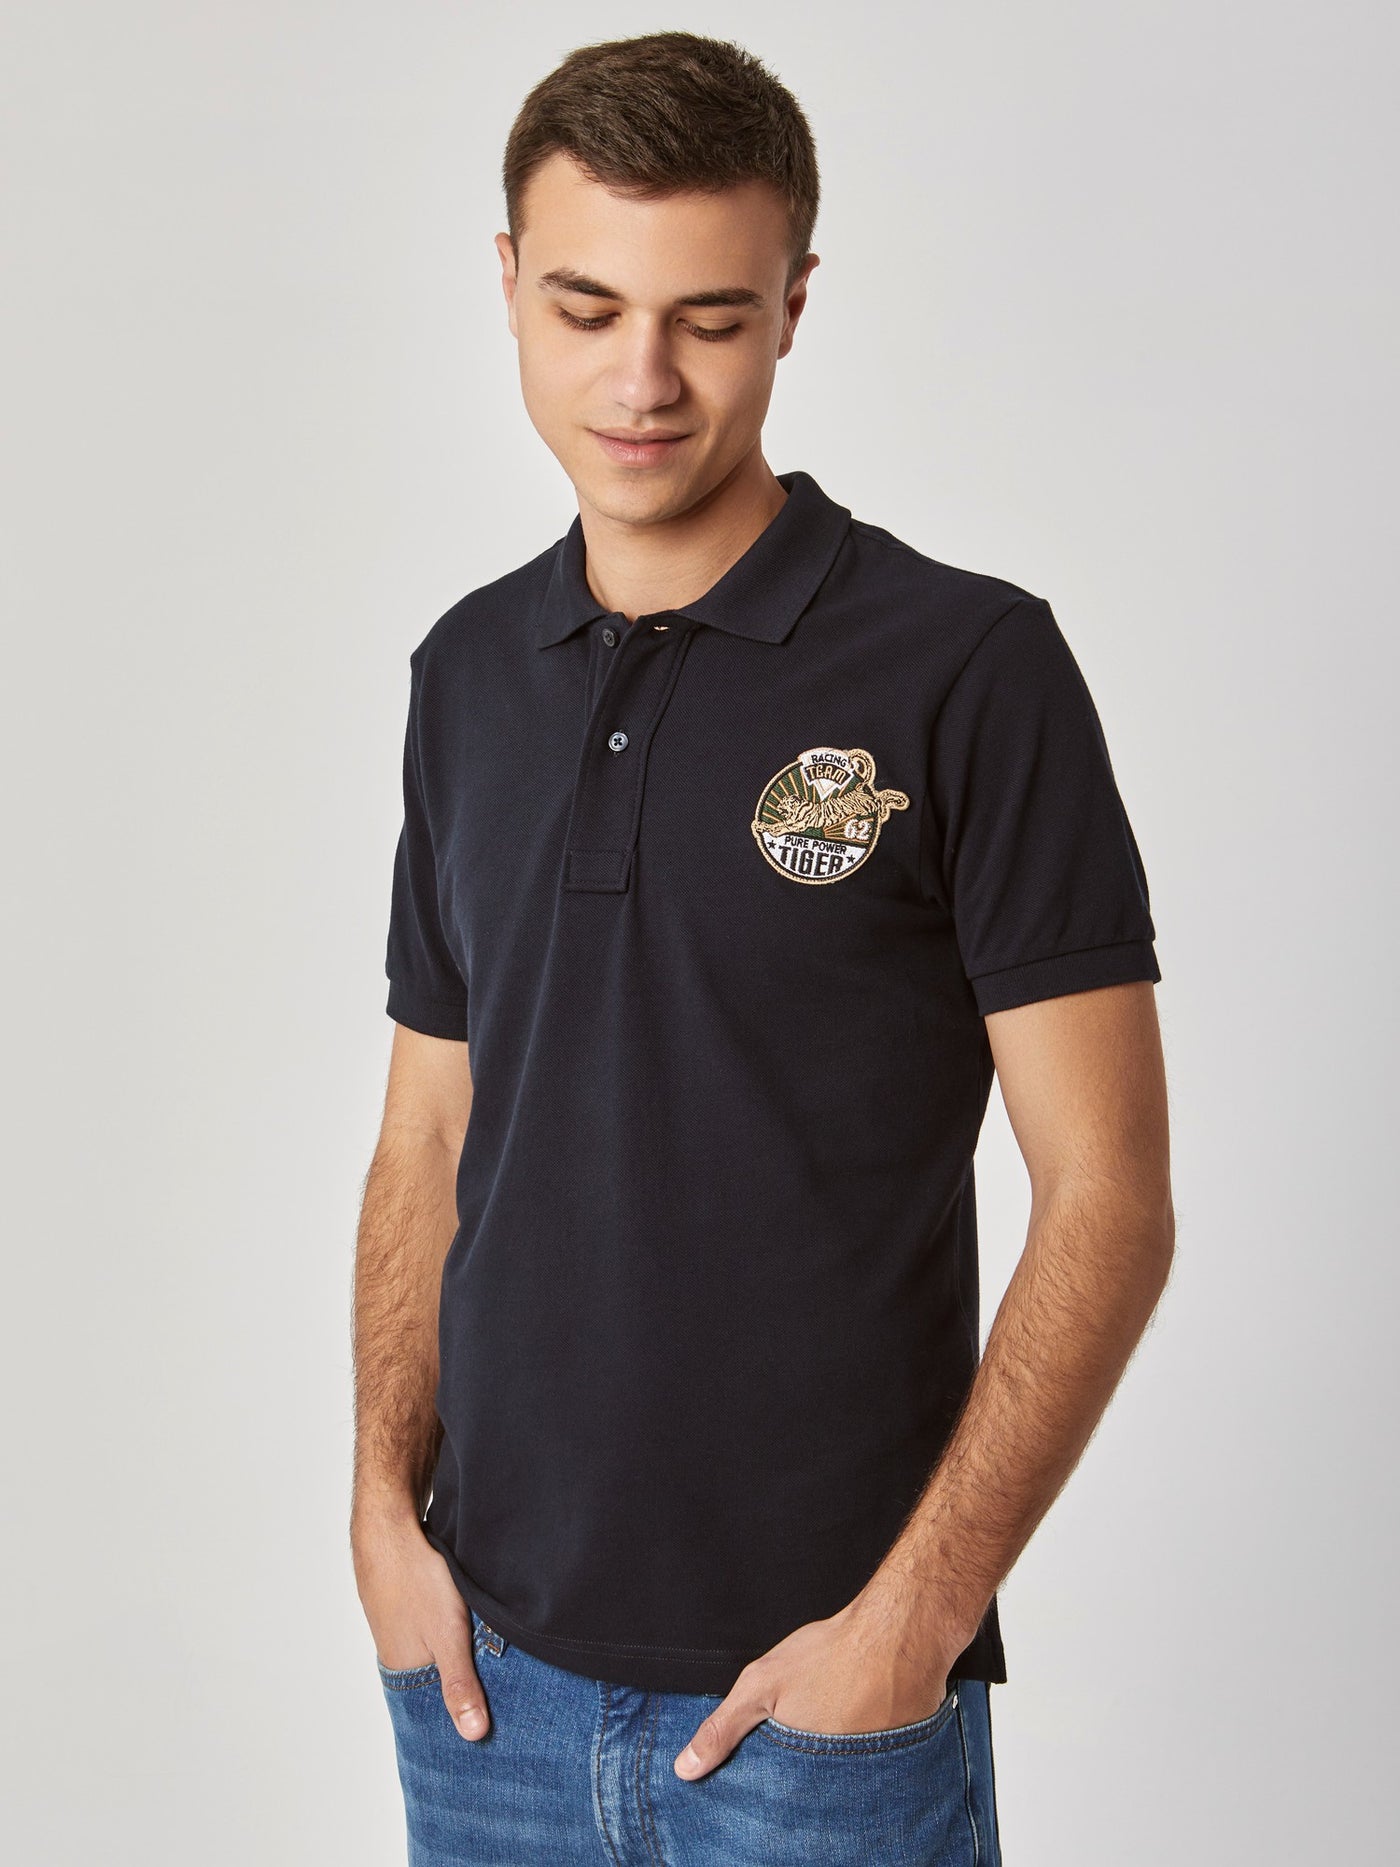 Polo Shirt - Chest Embroidery Design